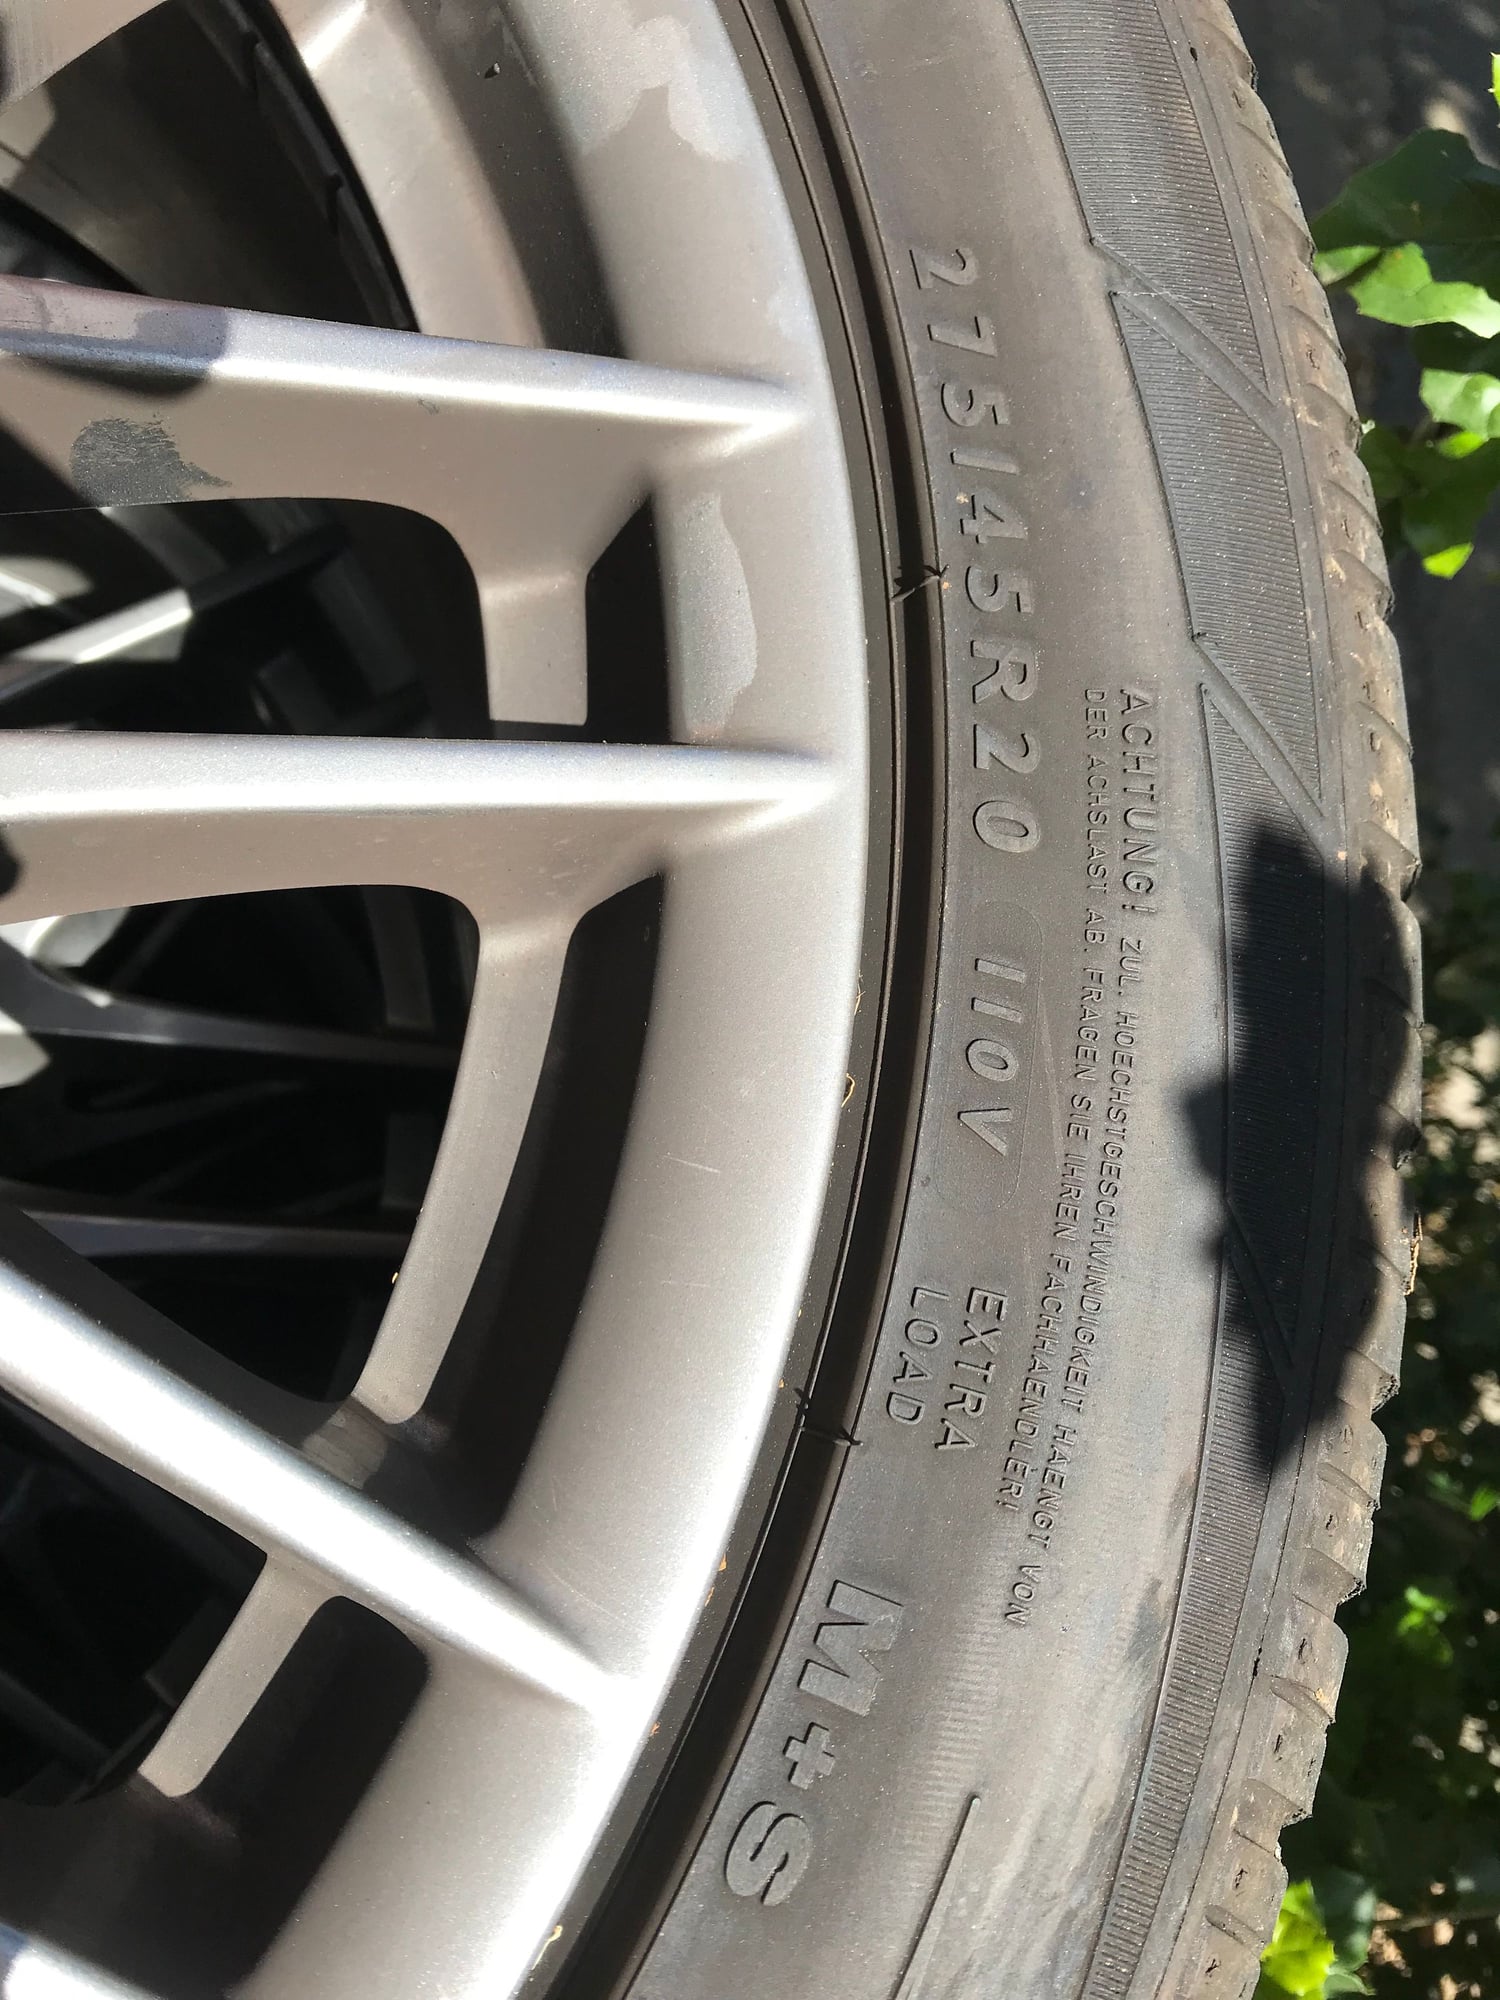 Wheels and Tires/Axles - 20" Porsche Wheels w/ TPMS from 2012 Cayenne - Steal them for $400 - Used - 2011 to 2019 Porsche Cayenne - Sausalito, CA 94965, United States